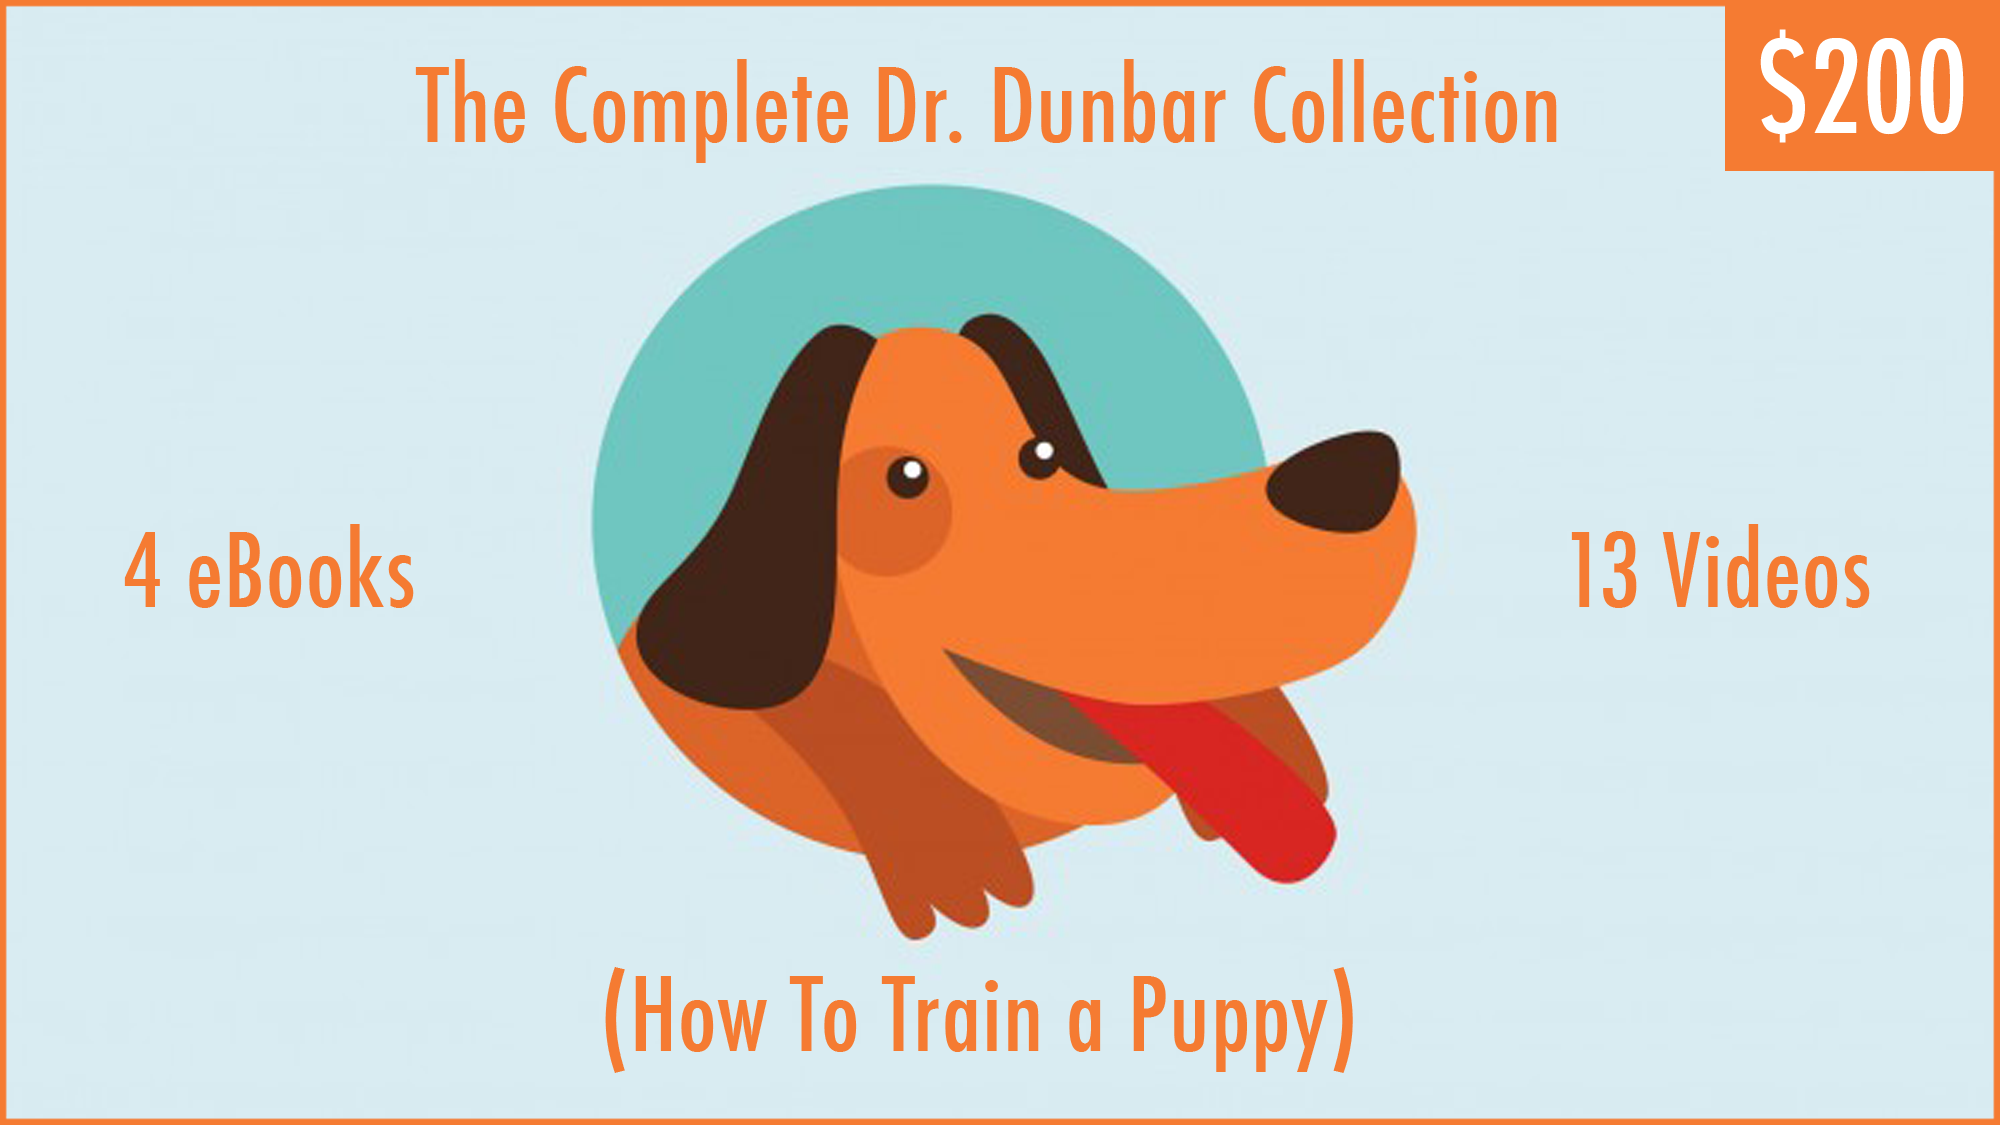 How To Train a Puppy / The Complete Dr. Dunbar Collection Online Course